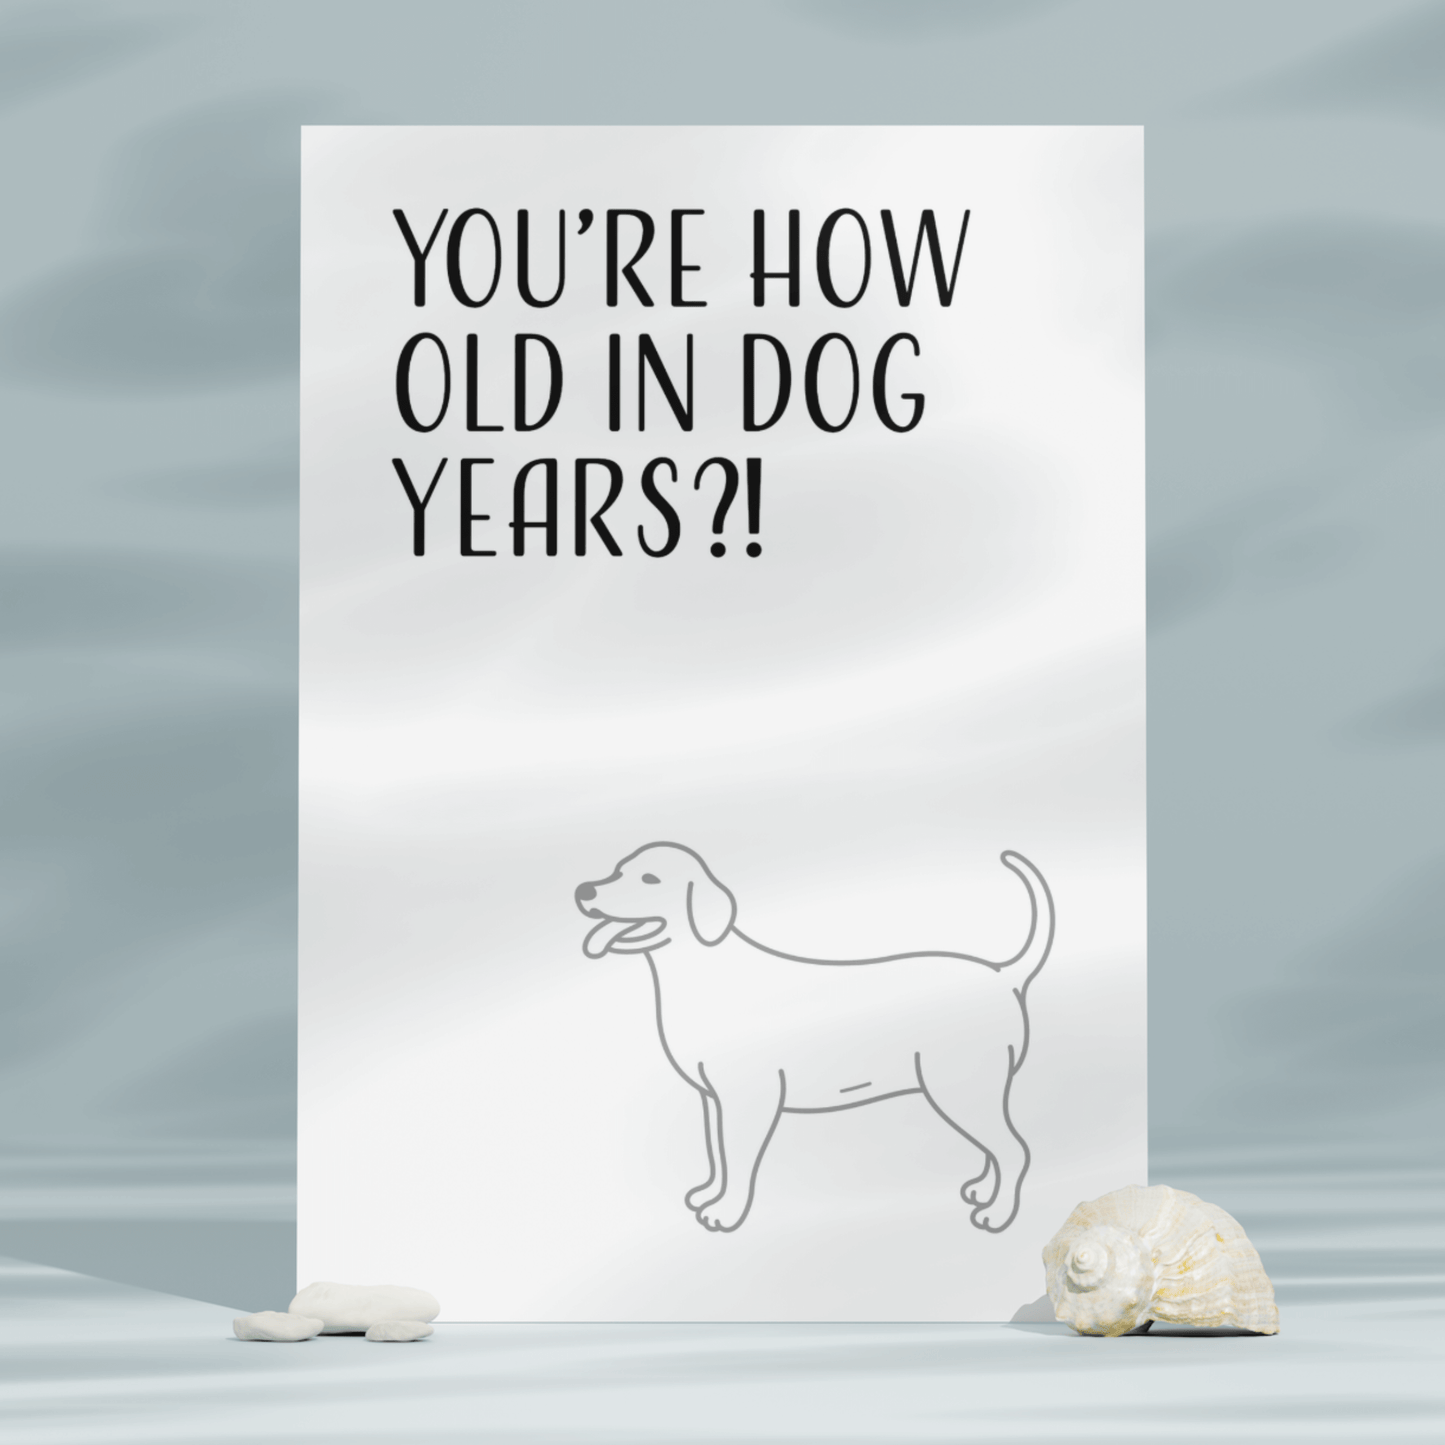 Little Kraken's You're How Old in Dog Years?!, Birthday Cards for £3.50 each